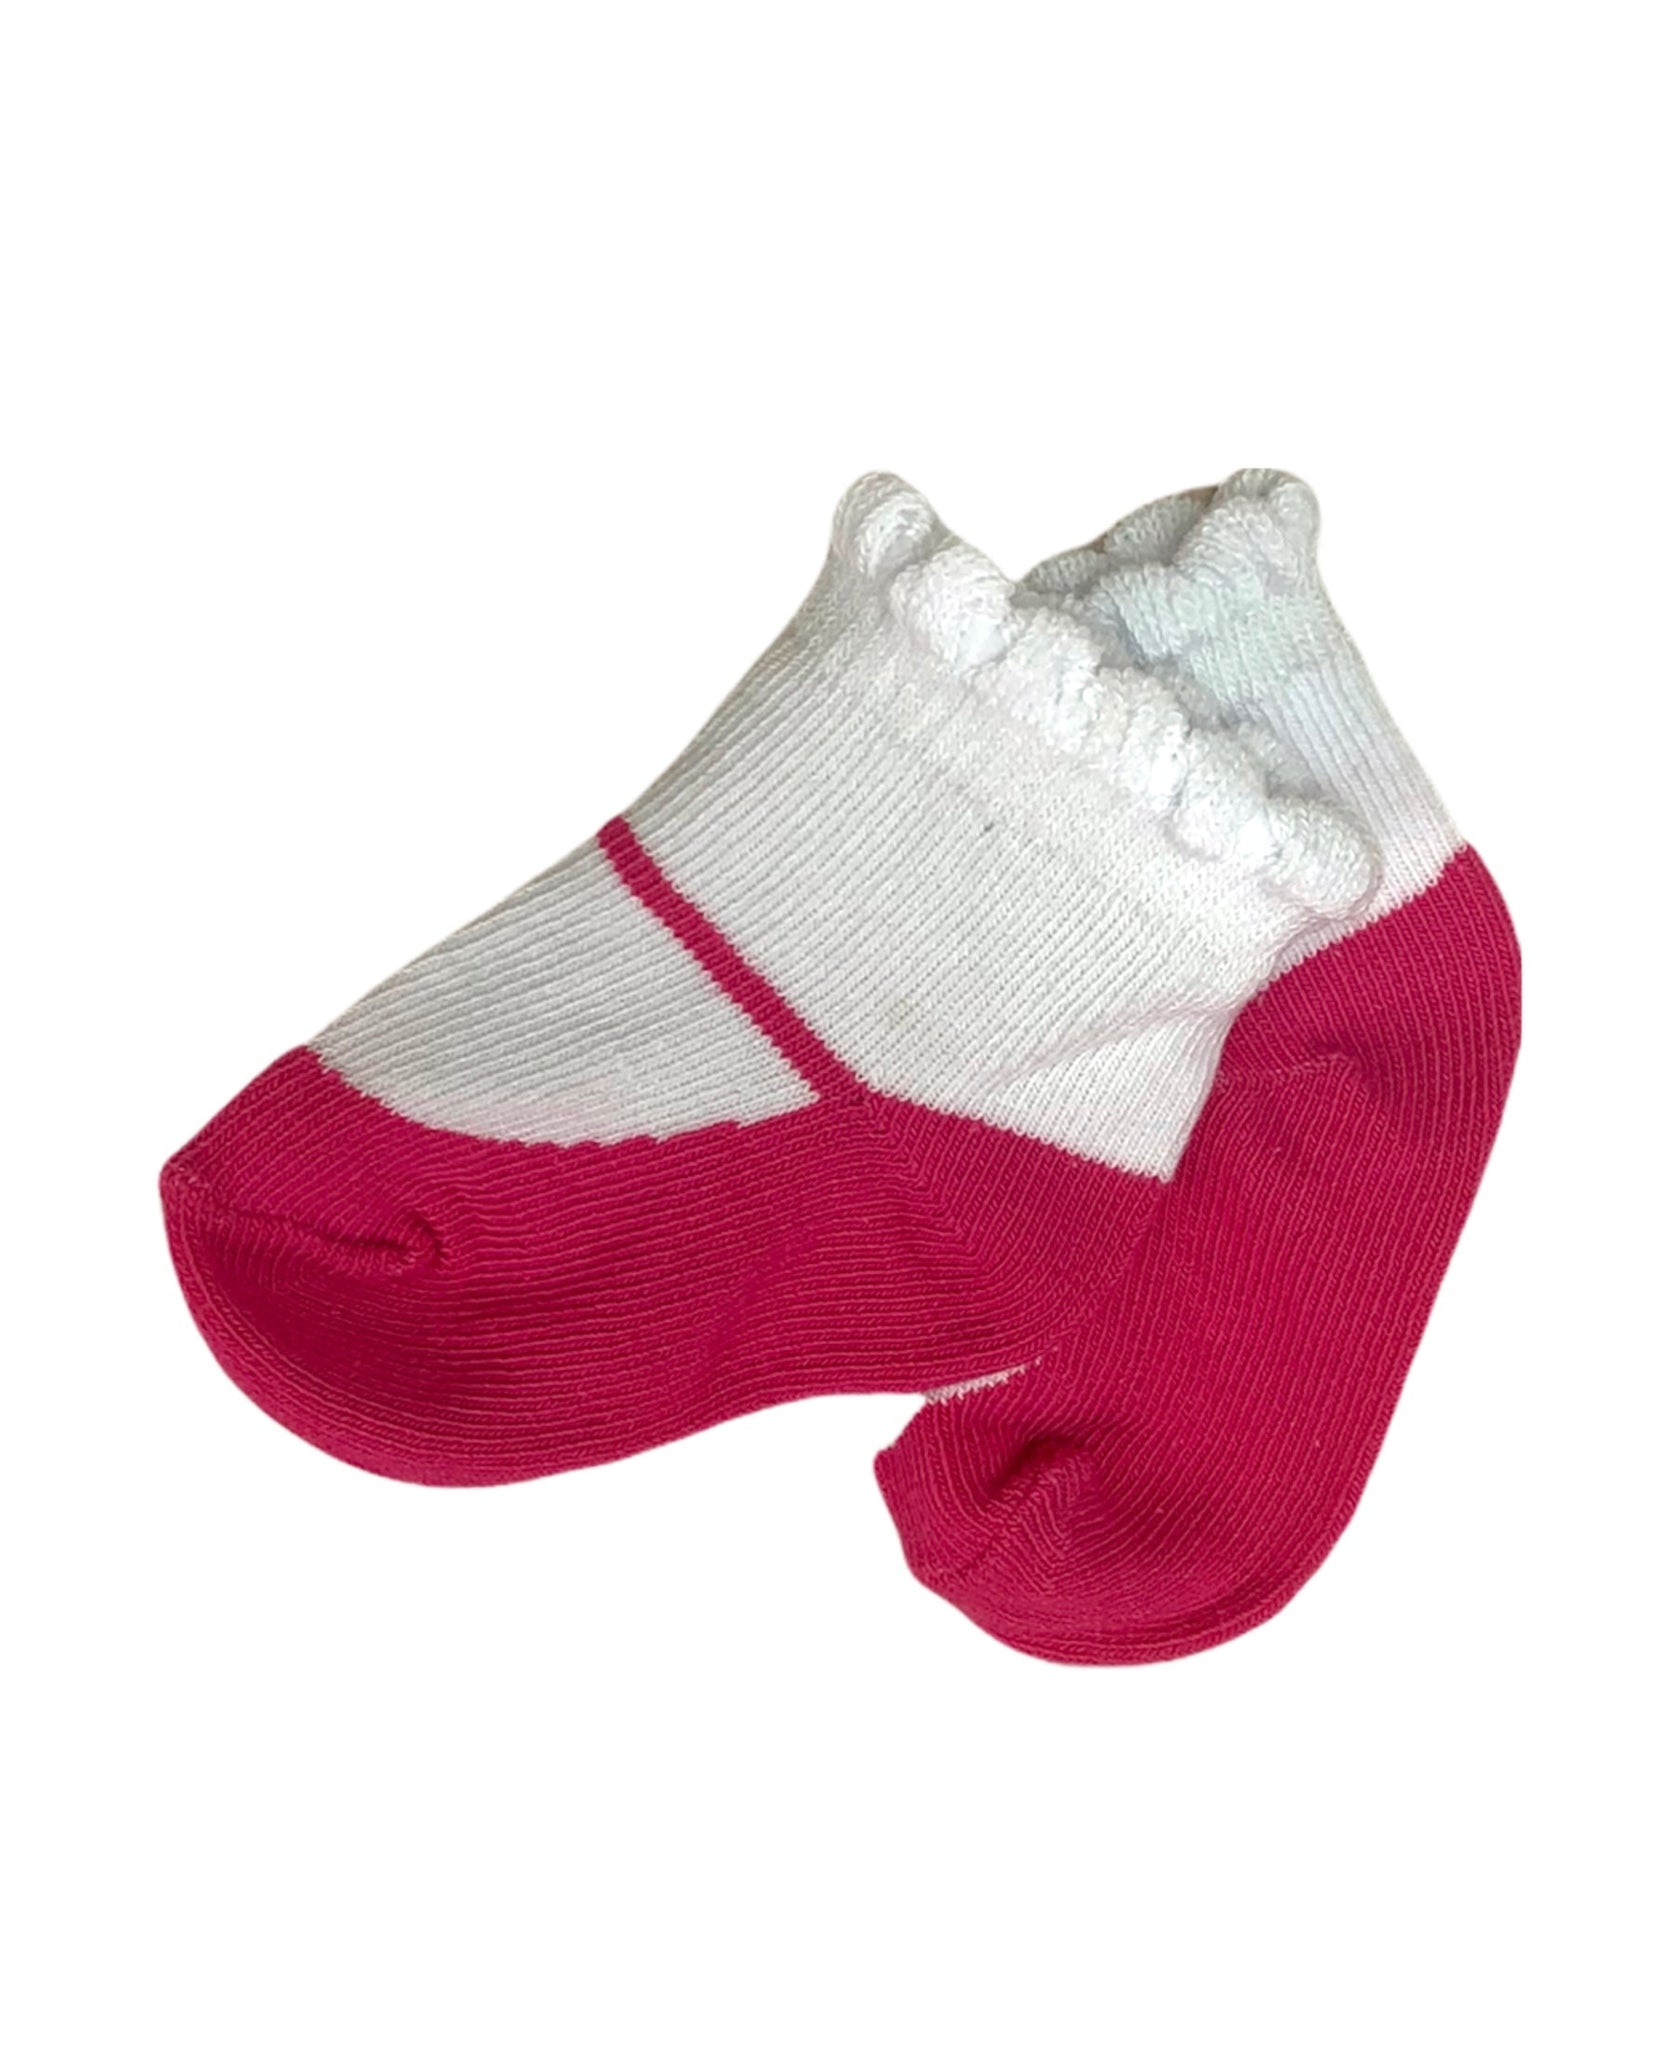 white socks with pink Mary Jane shoe design